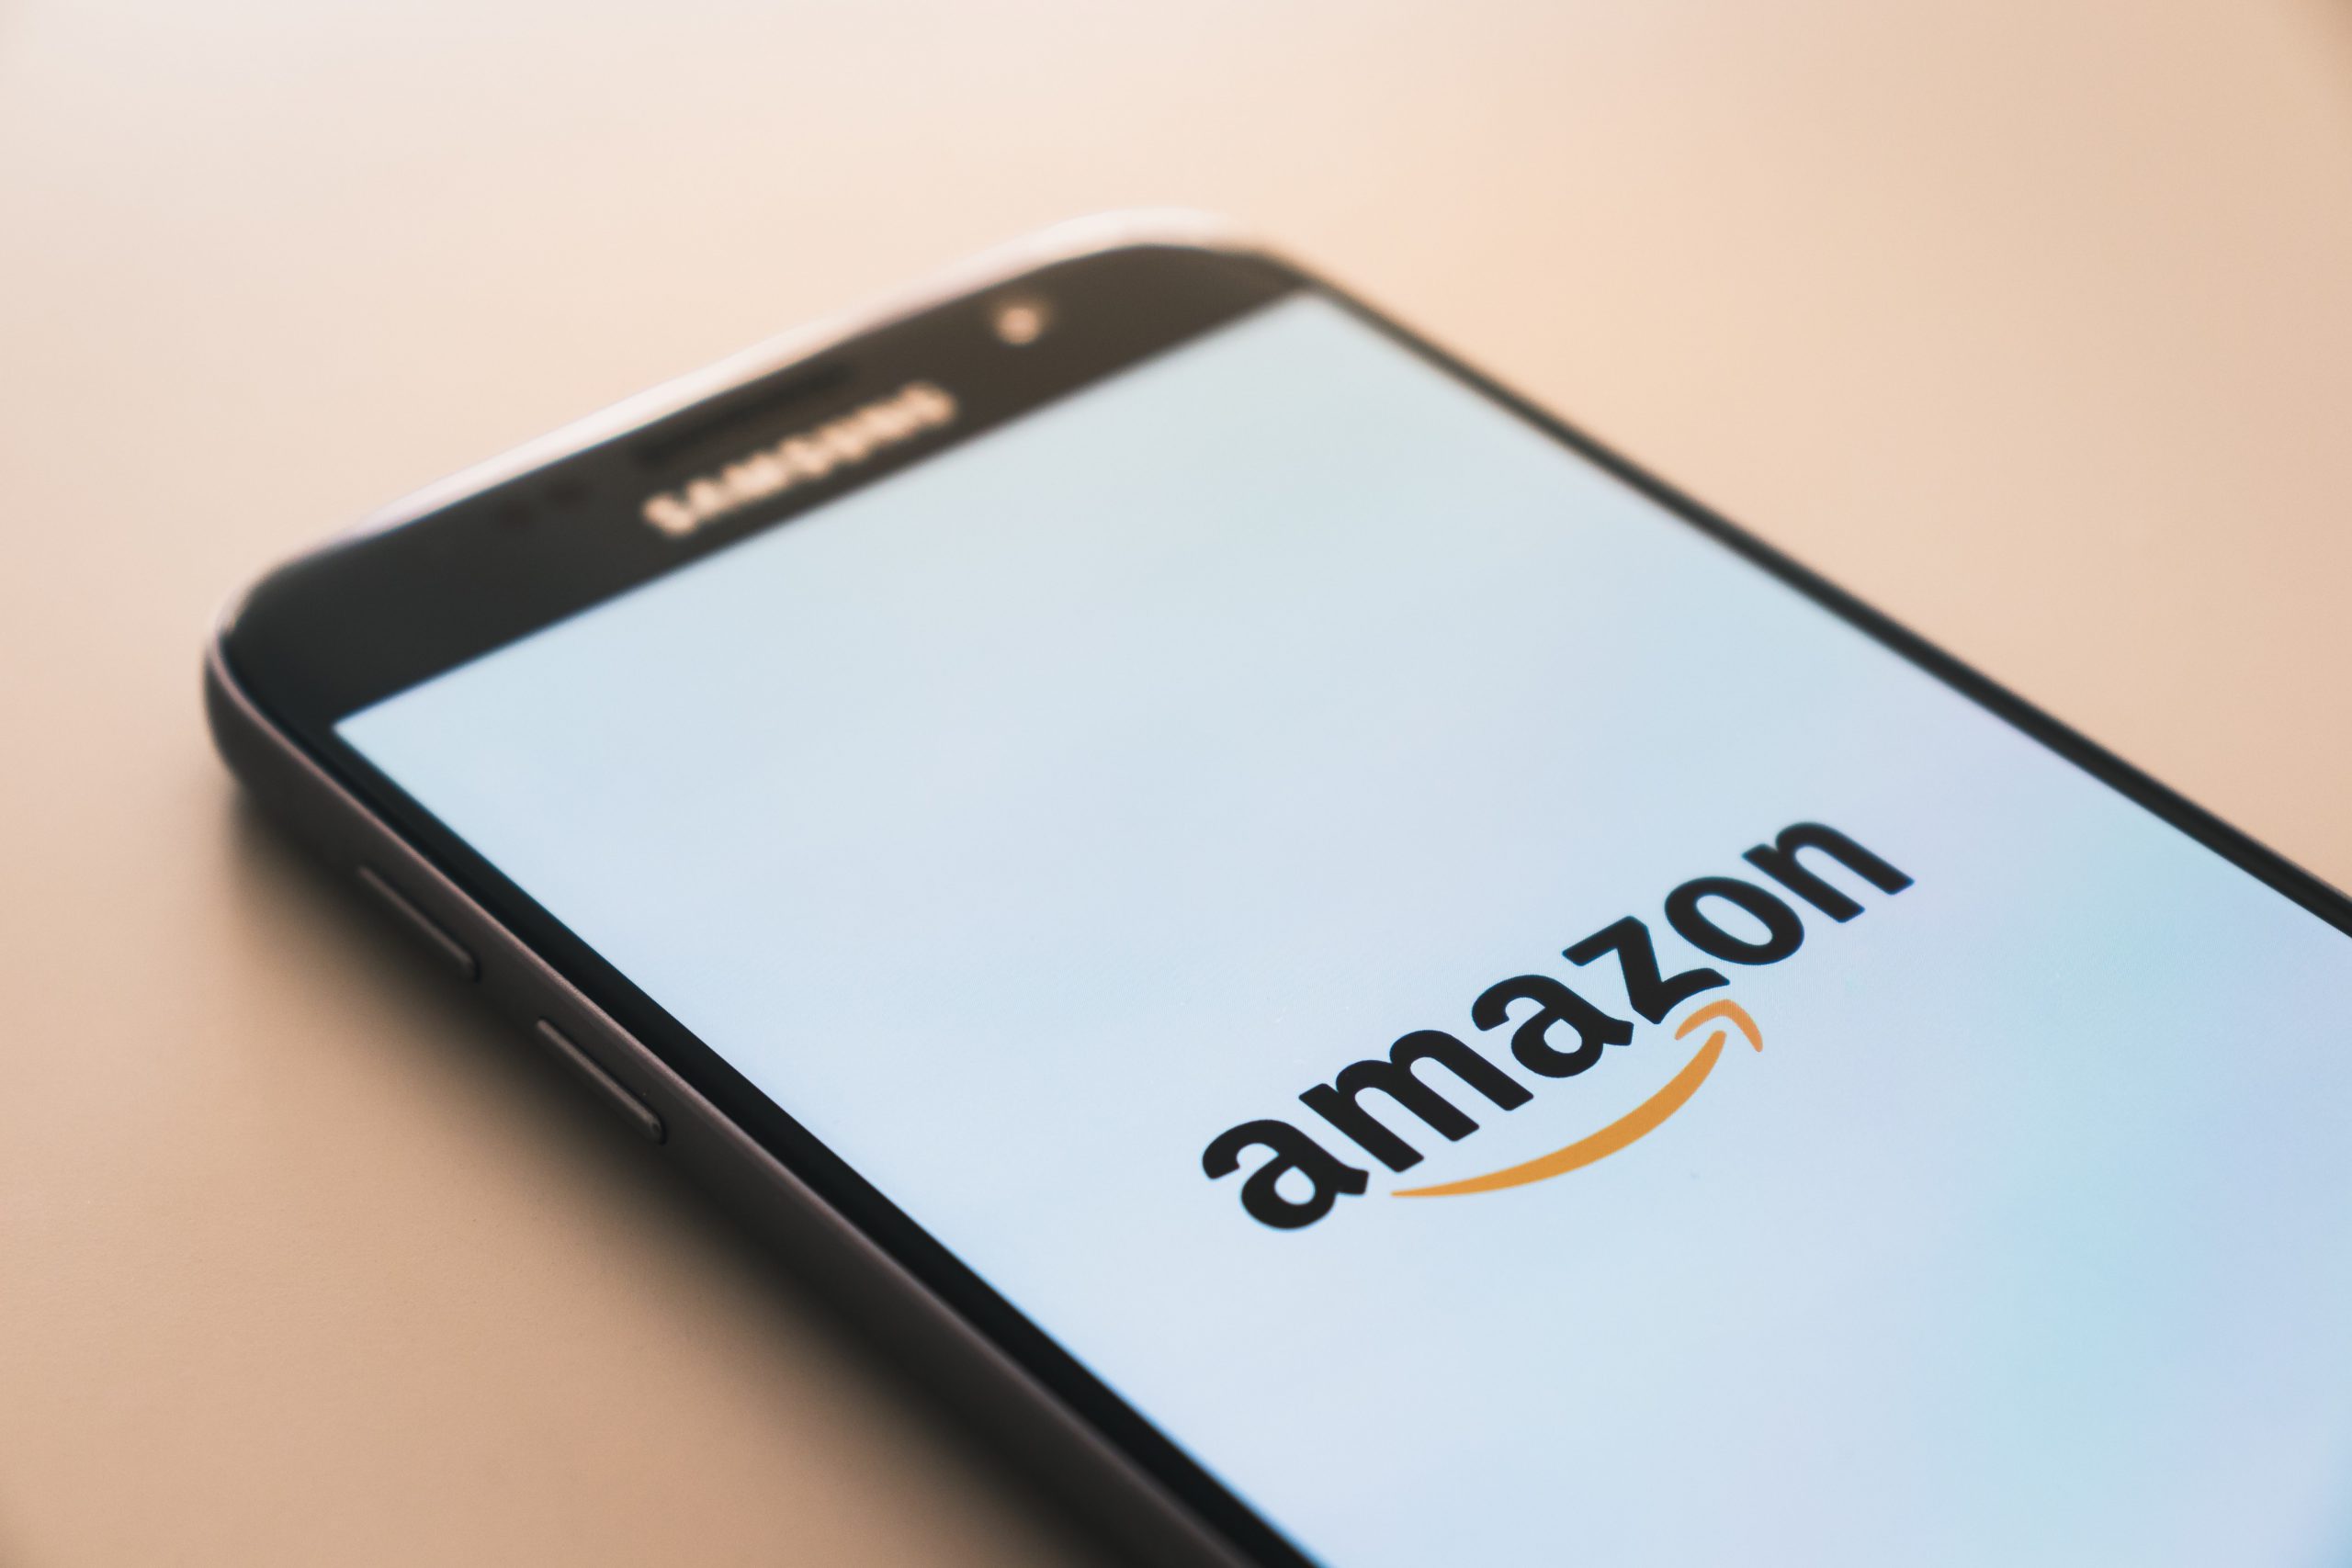 Amazon’s ballooning revenues demonstrate the need for transparency in tax affairs